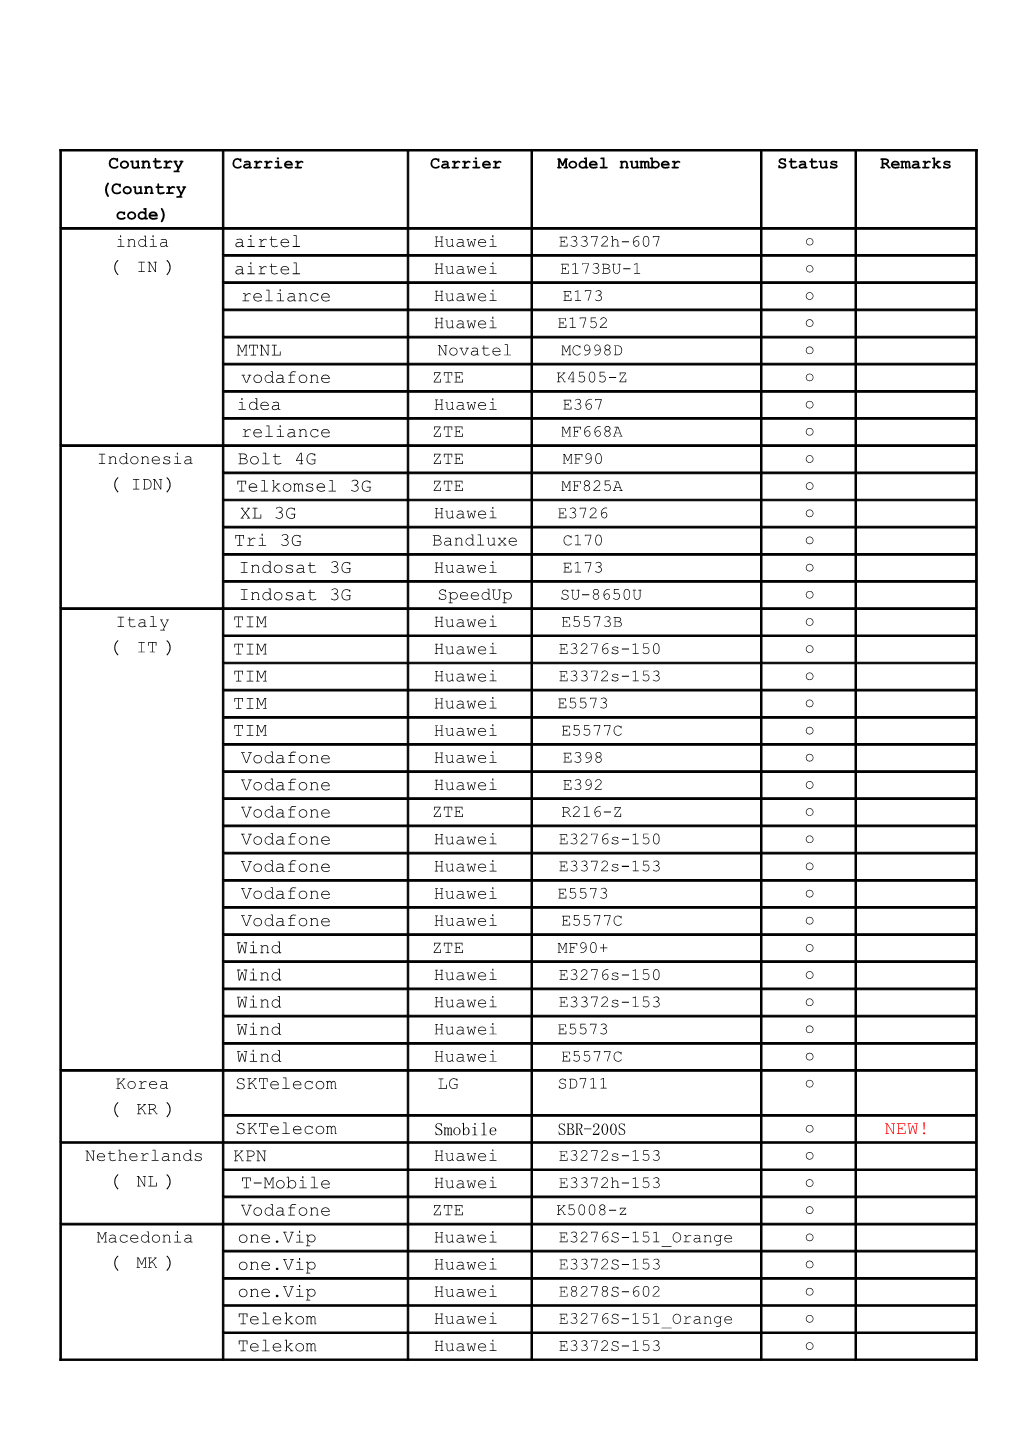 Smart-Telecaster Zao Supported Modem List As of June15, 2016